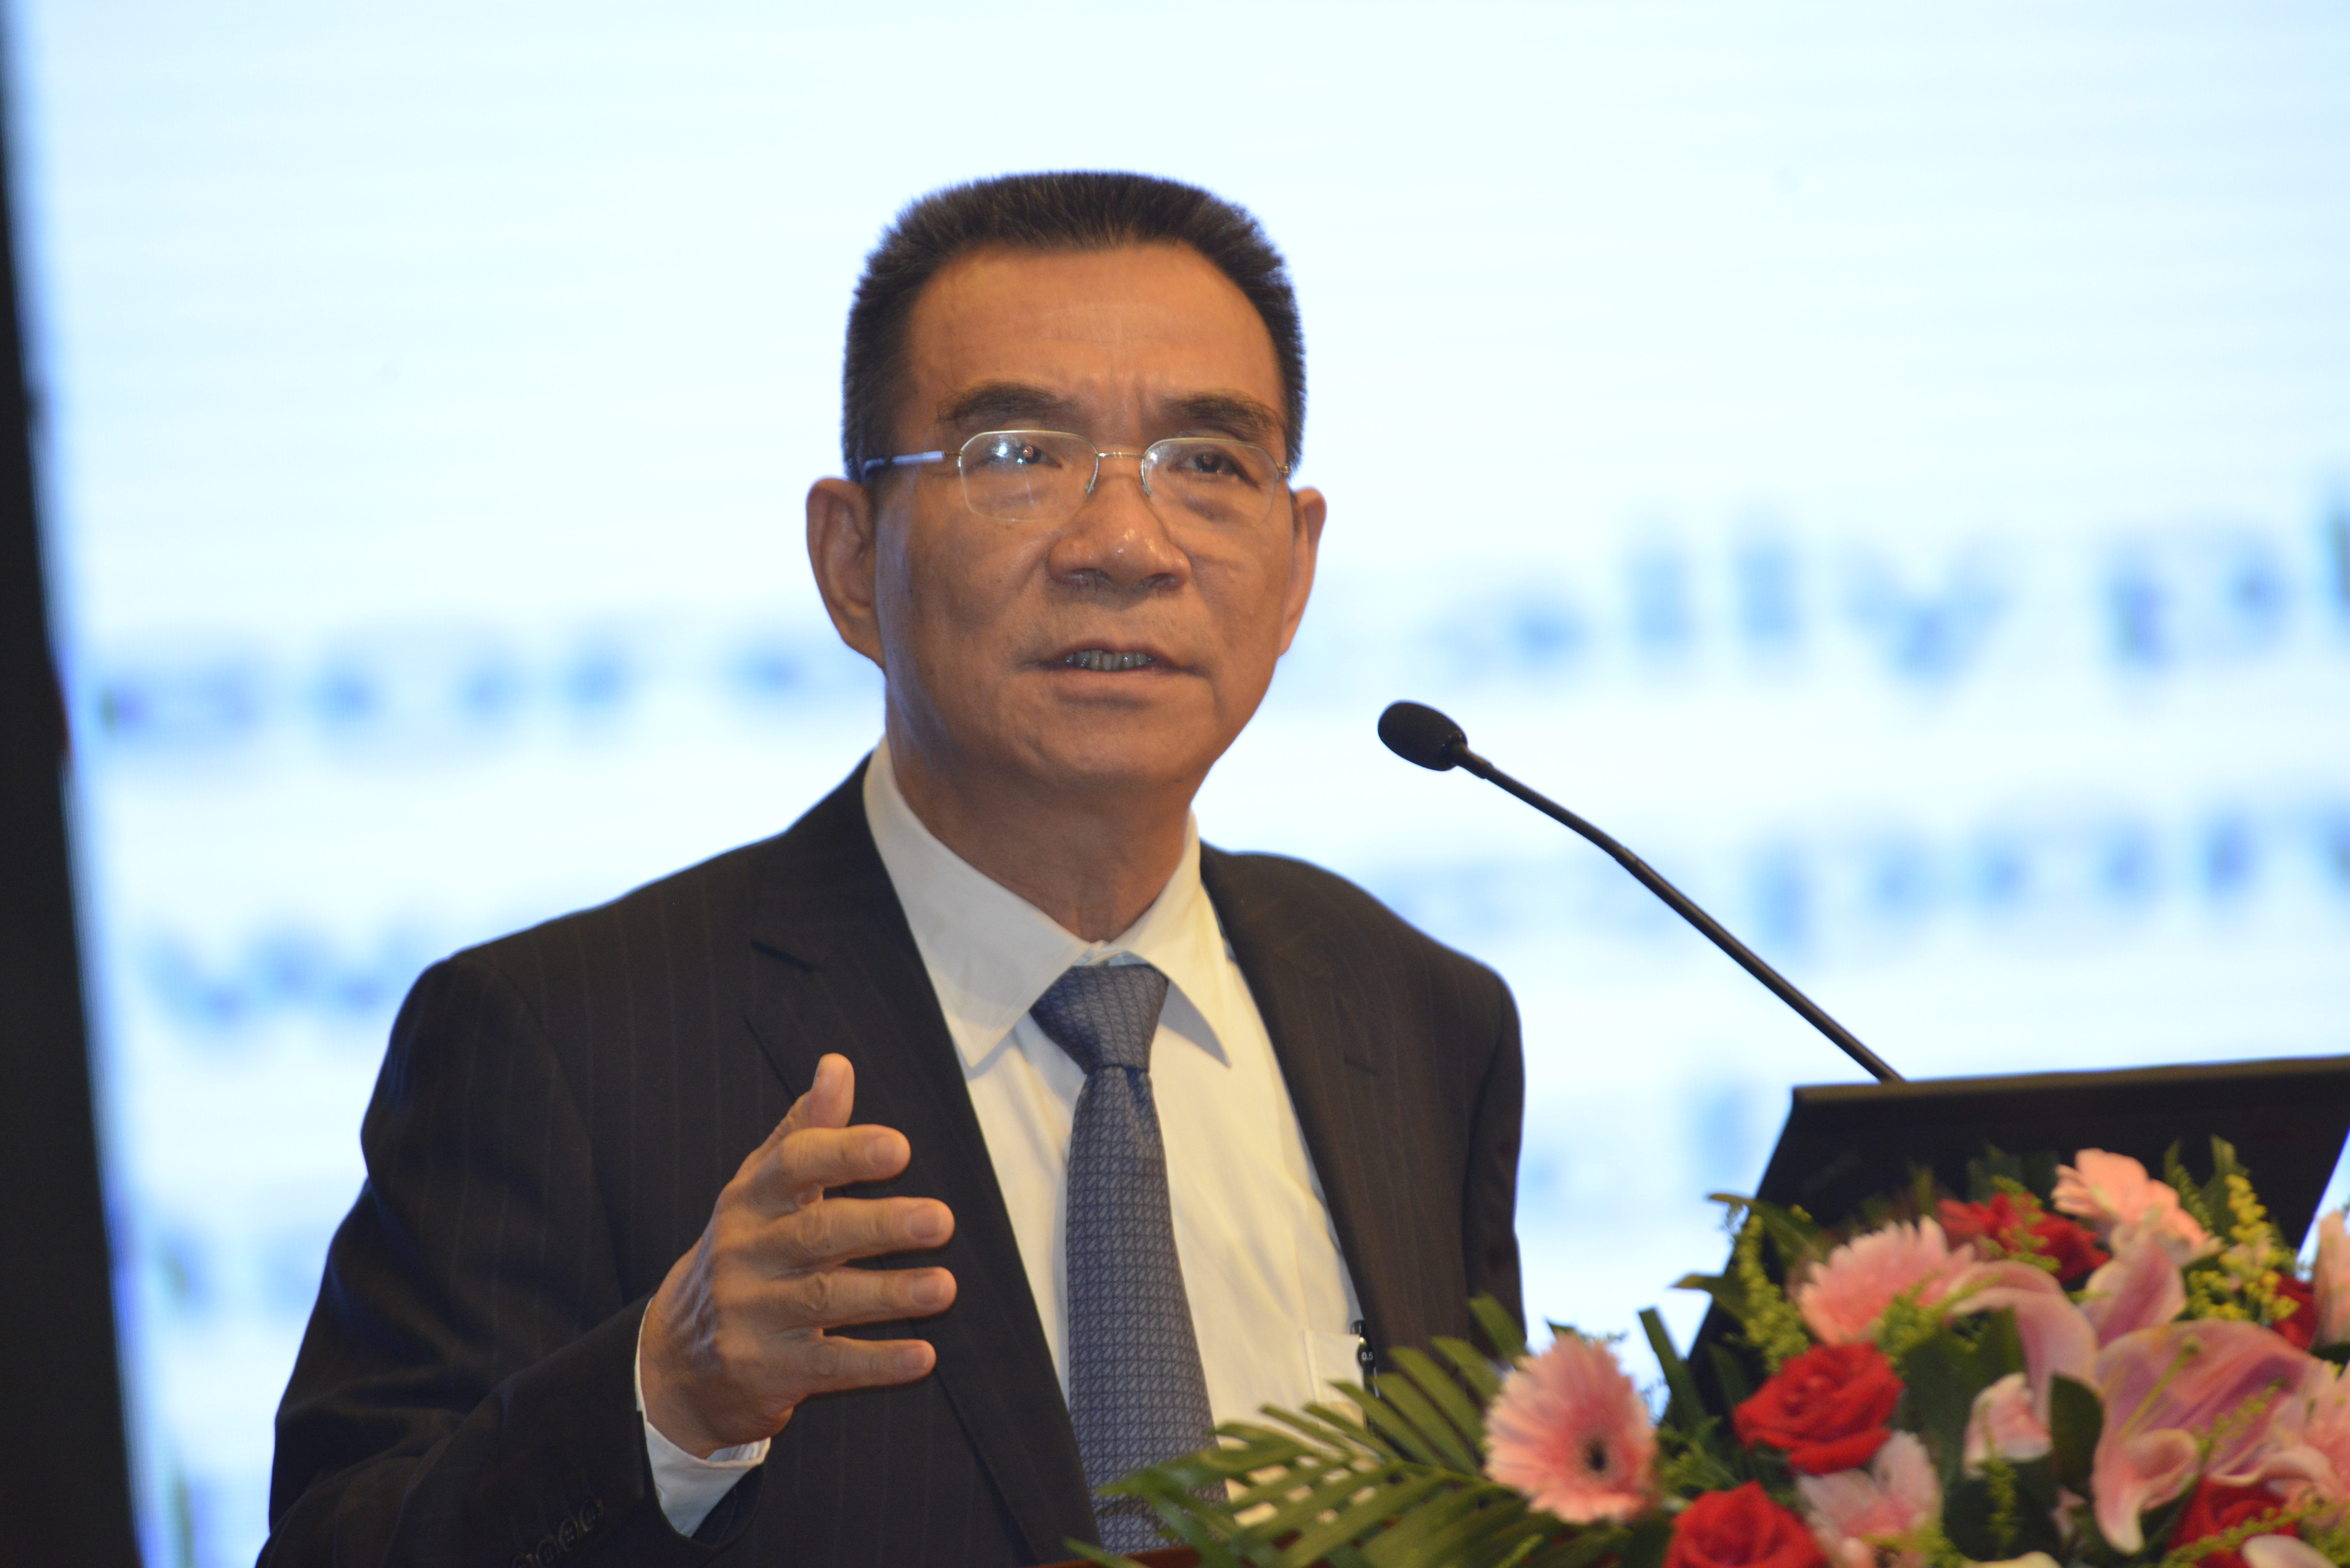 The distinguished Chinese economist Justin Yifu Lin at keynote speeches